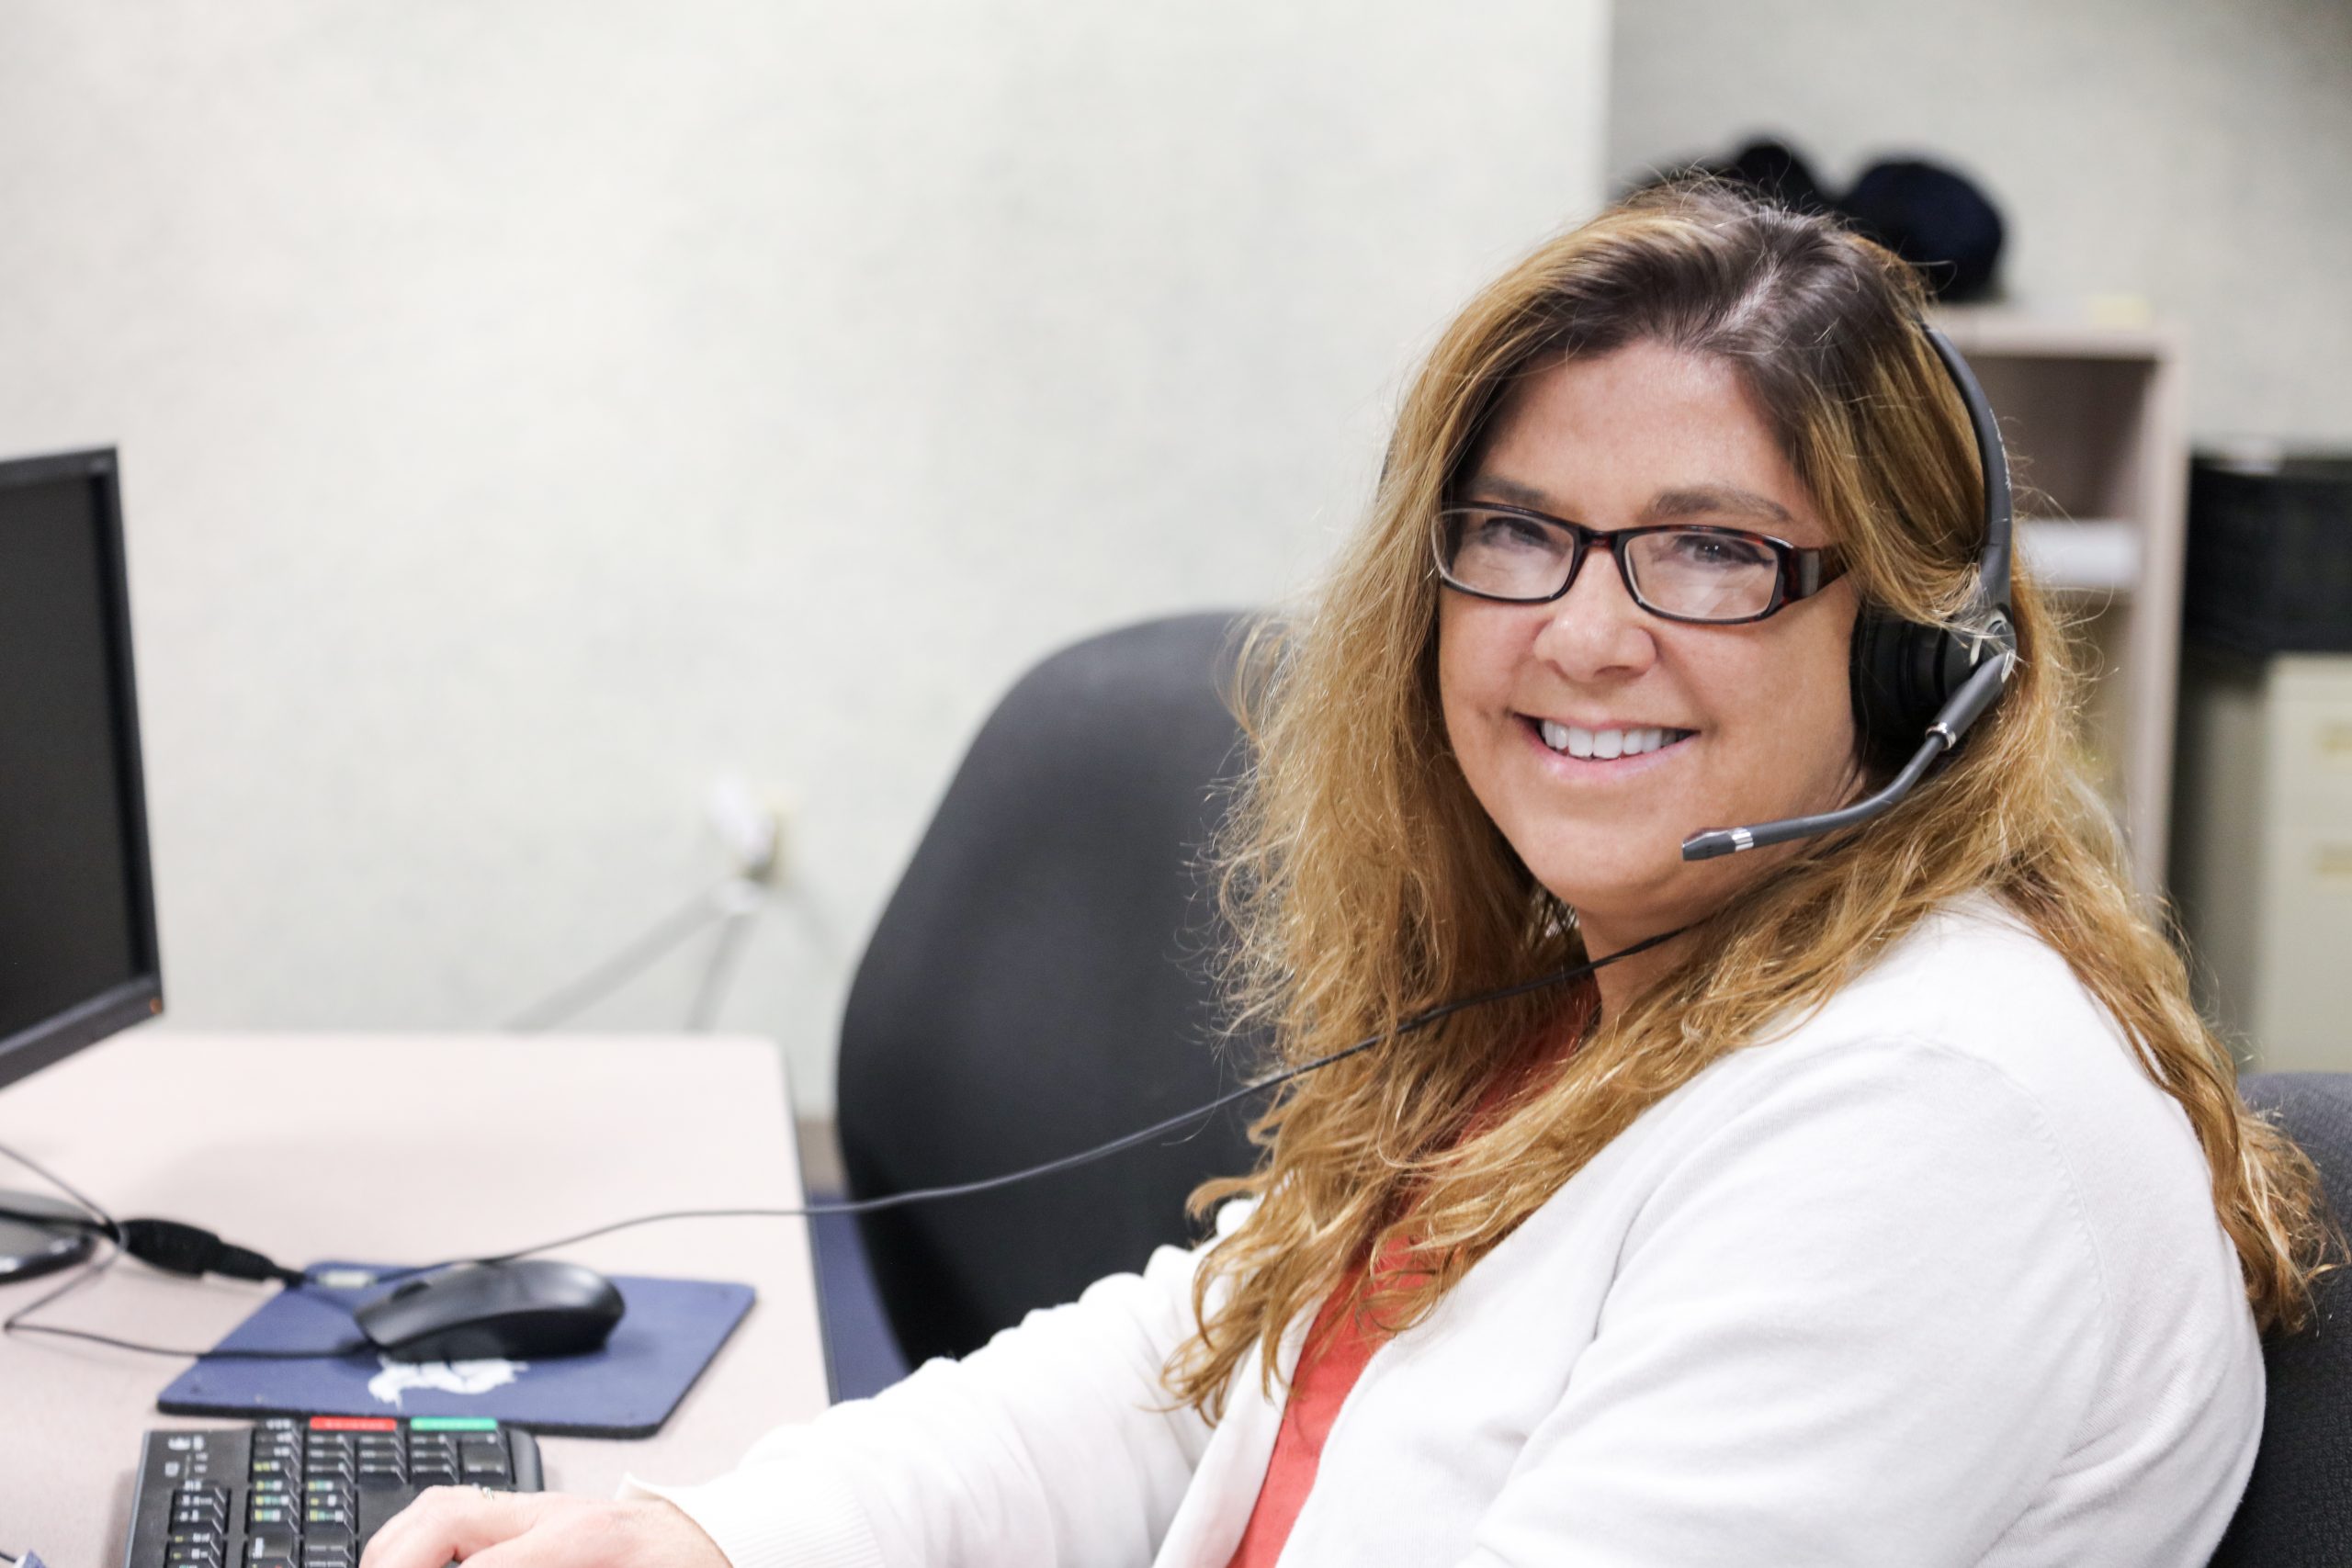 Female Call Center Agent happy to take your call